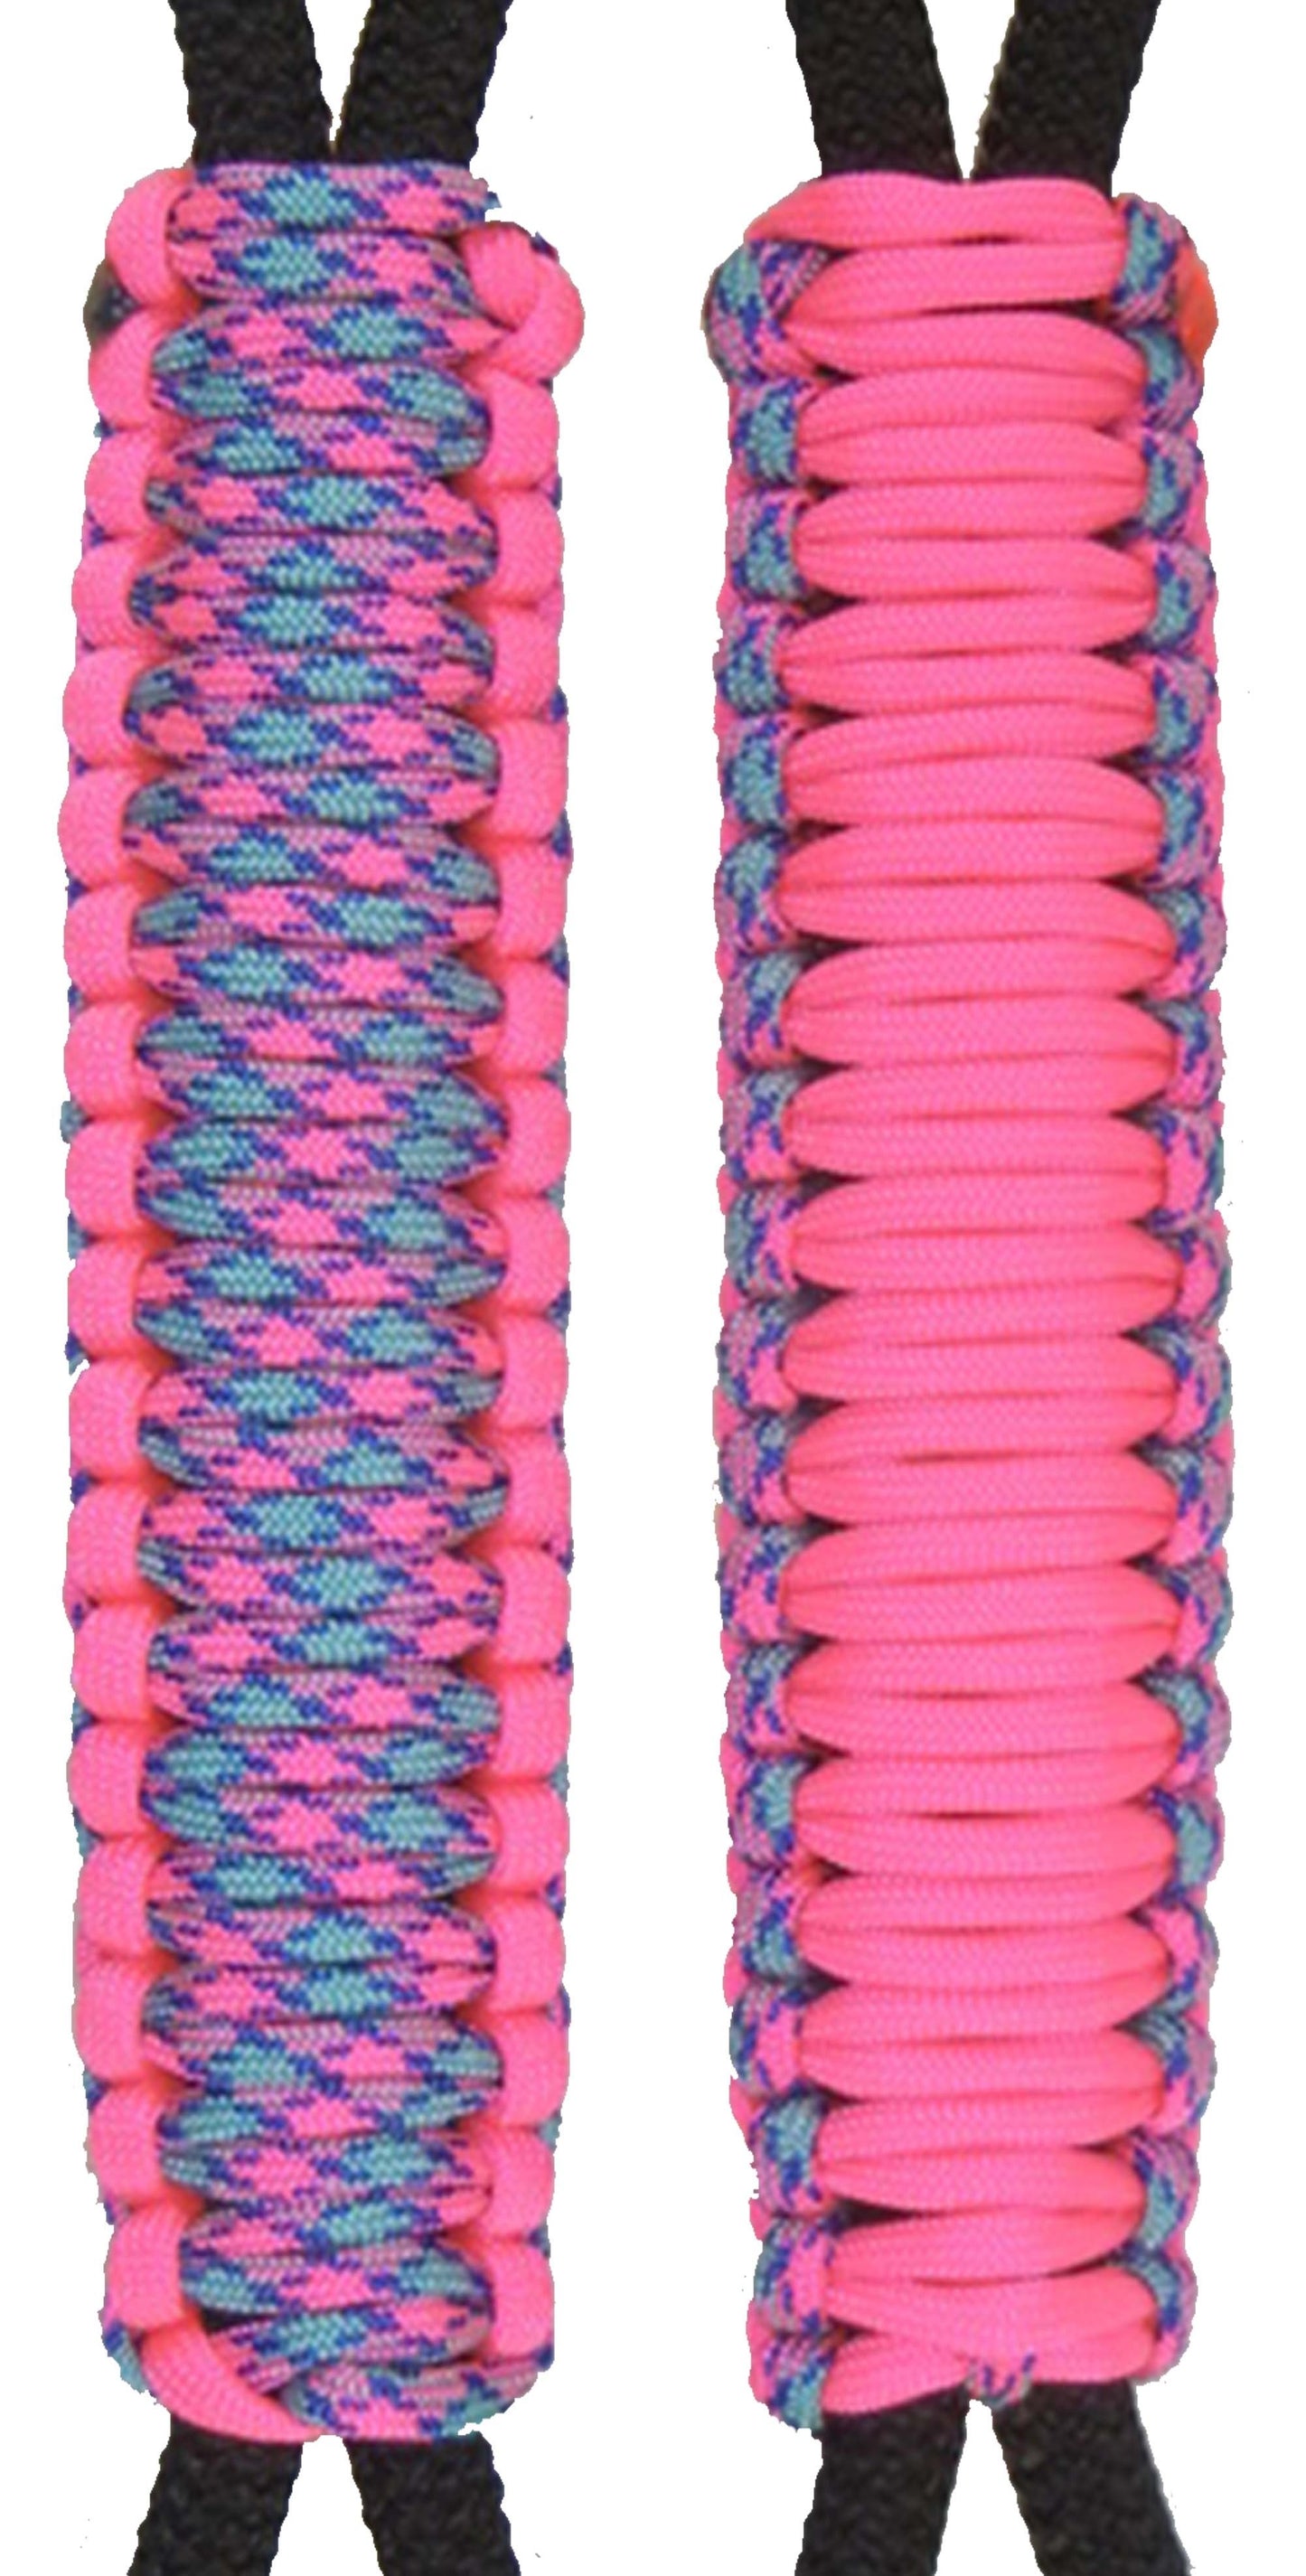 Neon Pink & Pixie Stix Paracord Handmade Handles for Stainless Steel Tumblers - Made in USA!